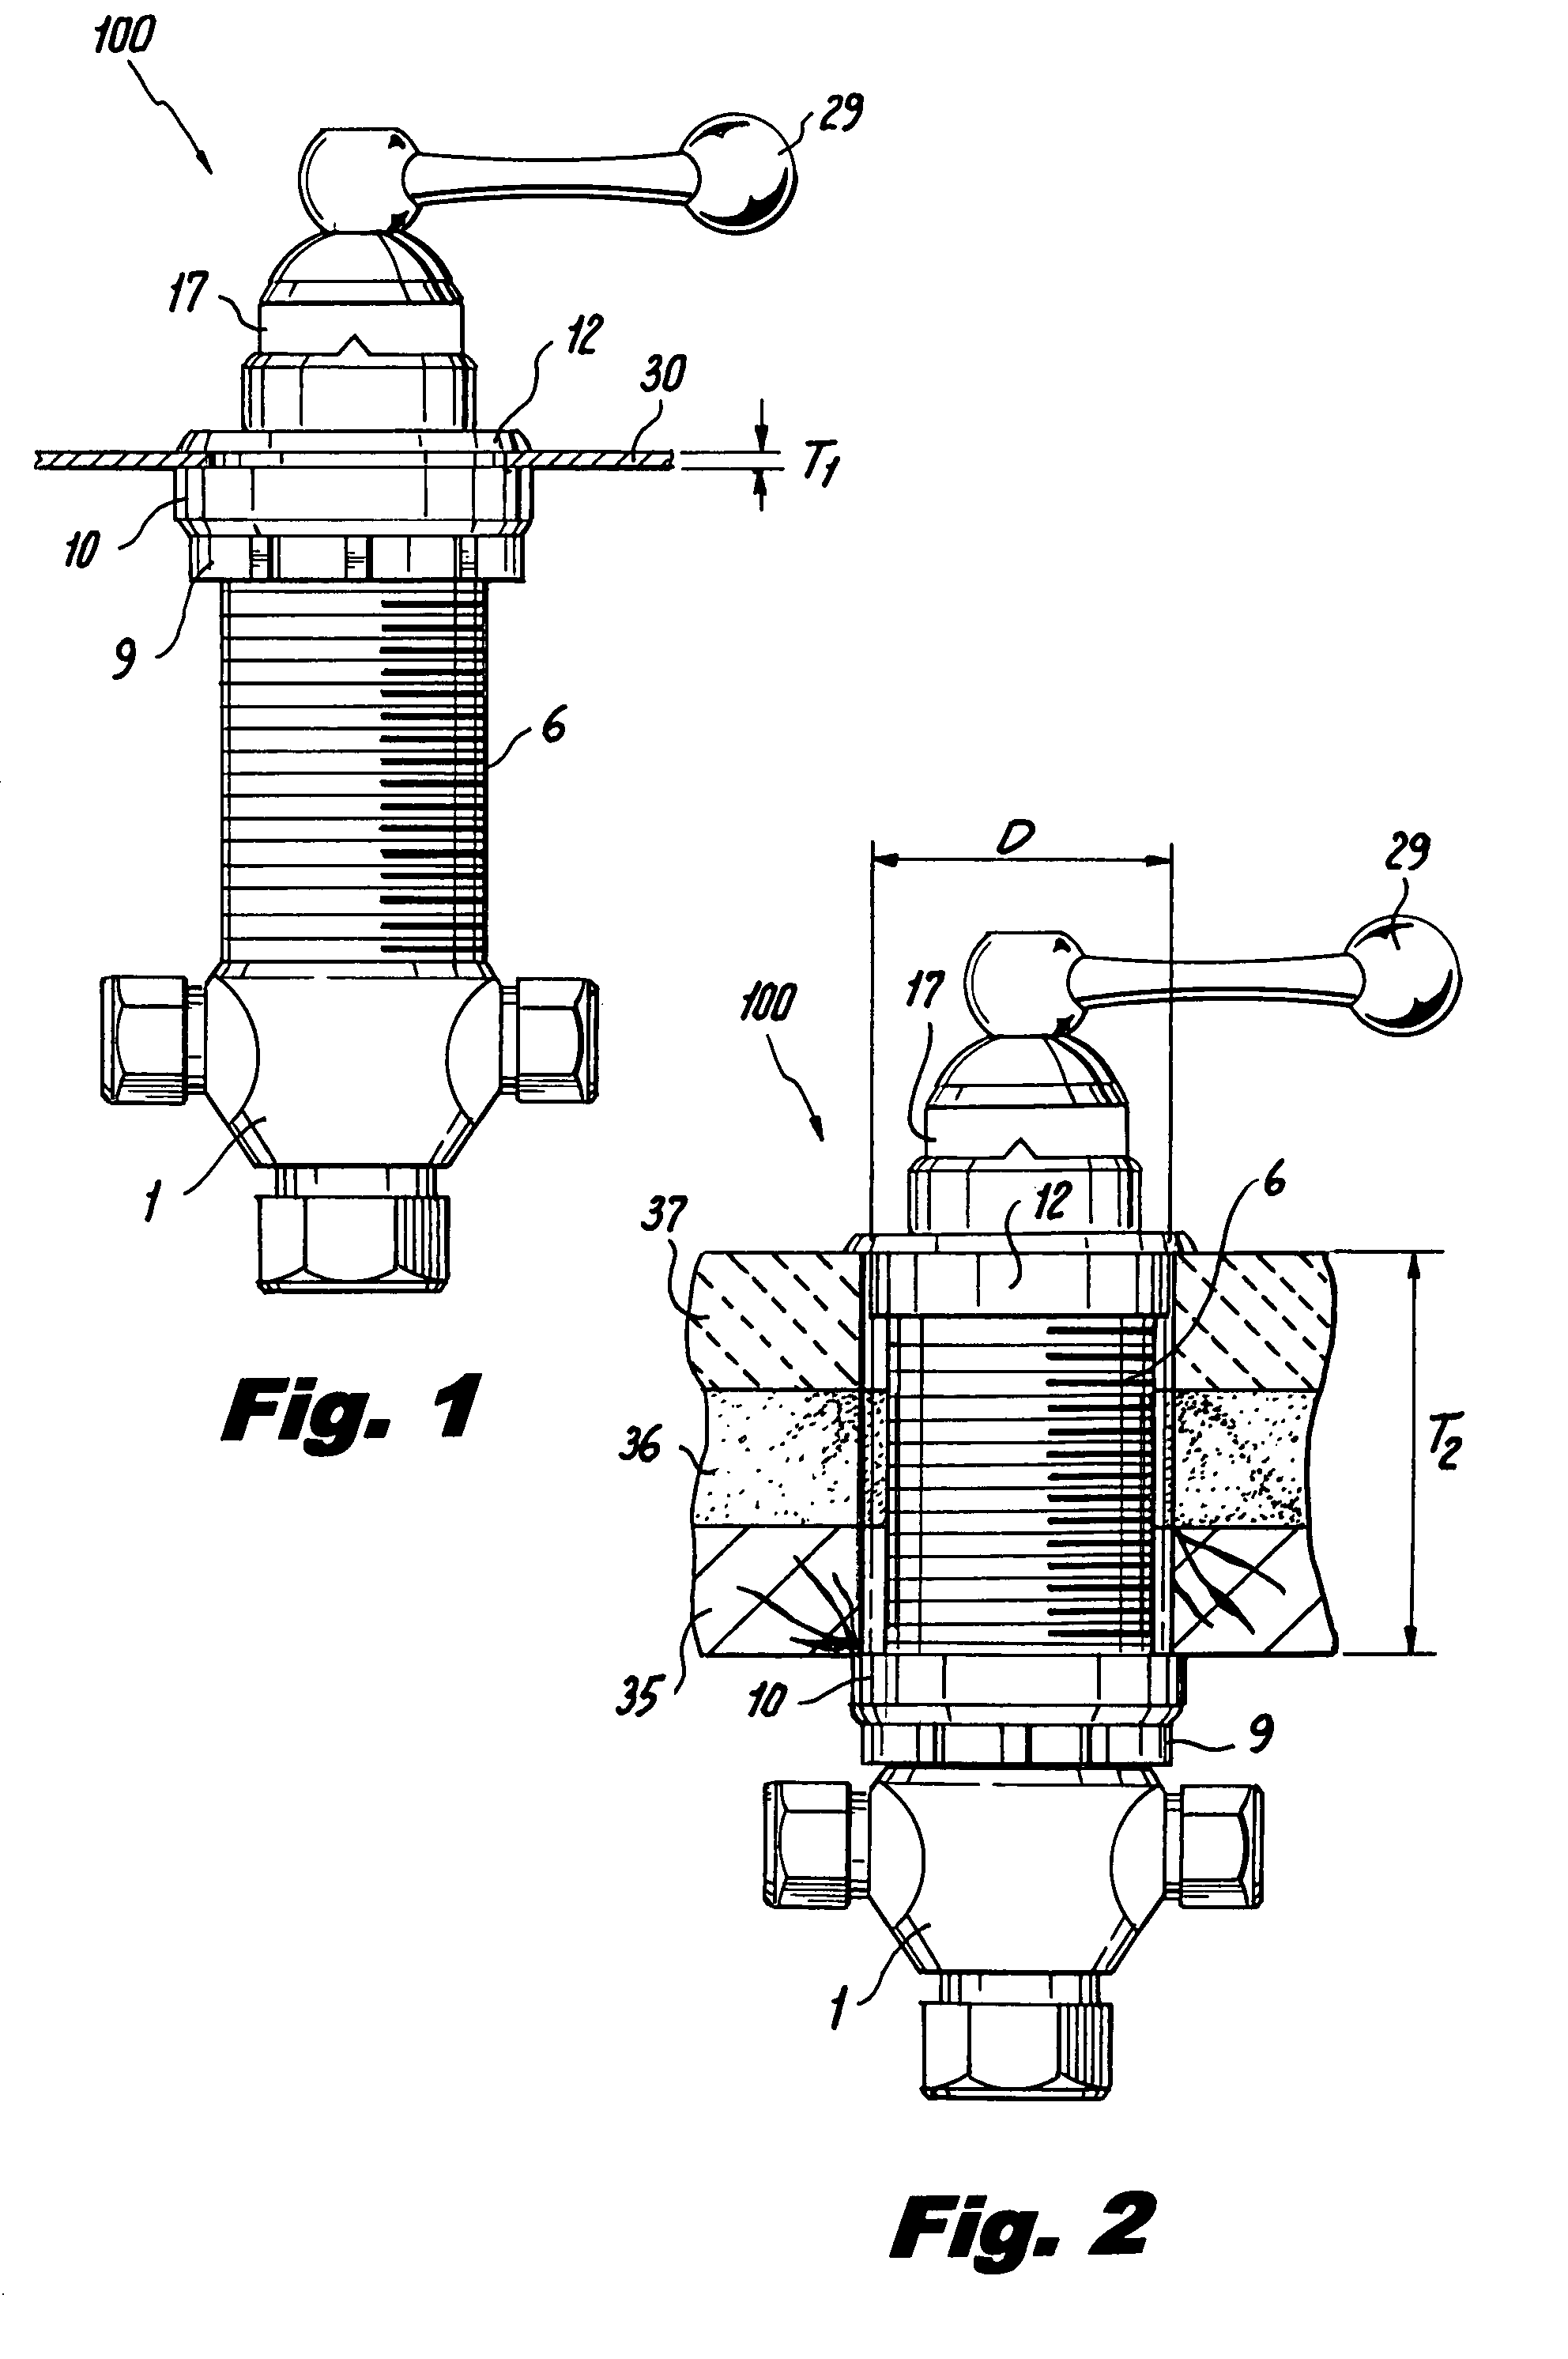 Thermostatic mixing valve for vertical mounting upon a horizontal bathtub deck